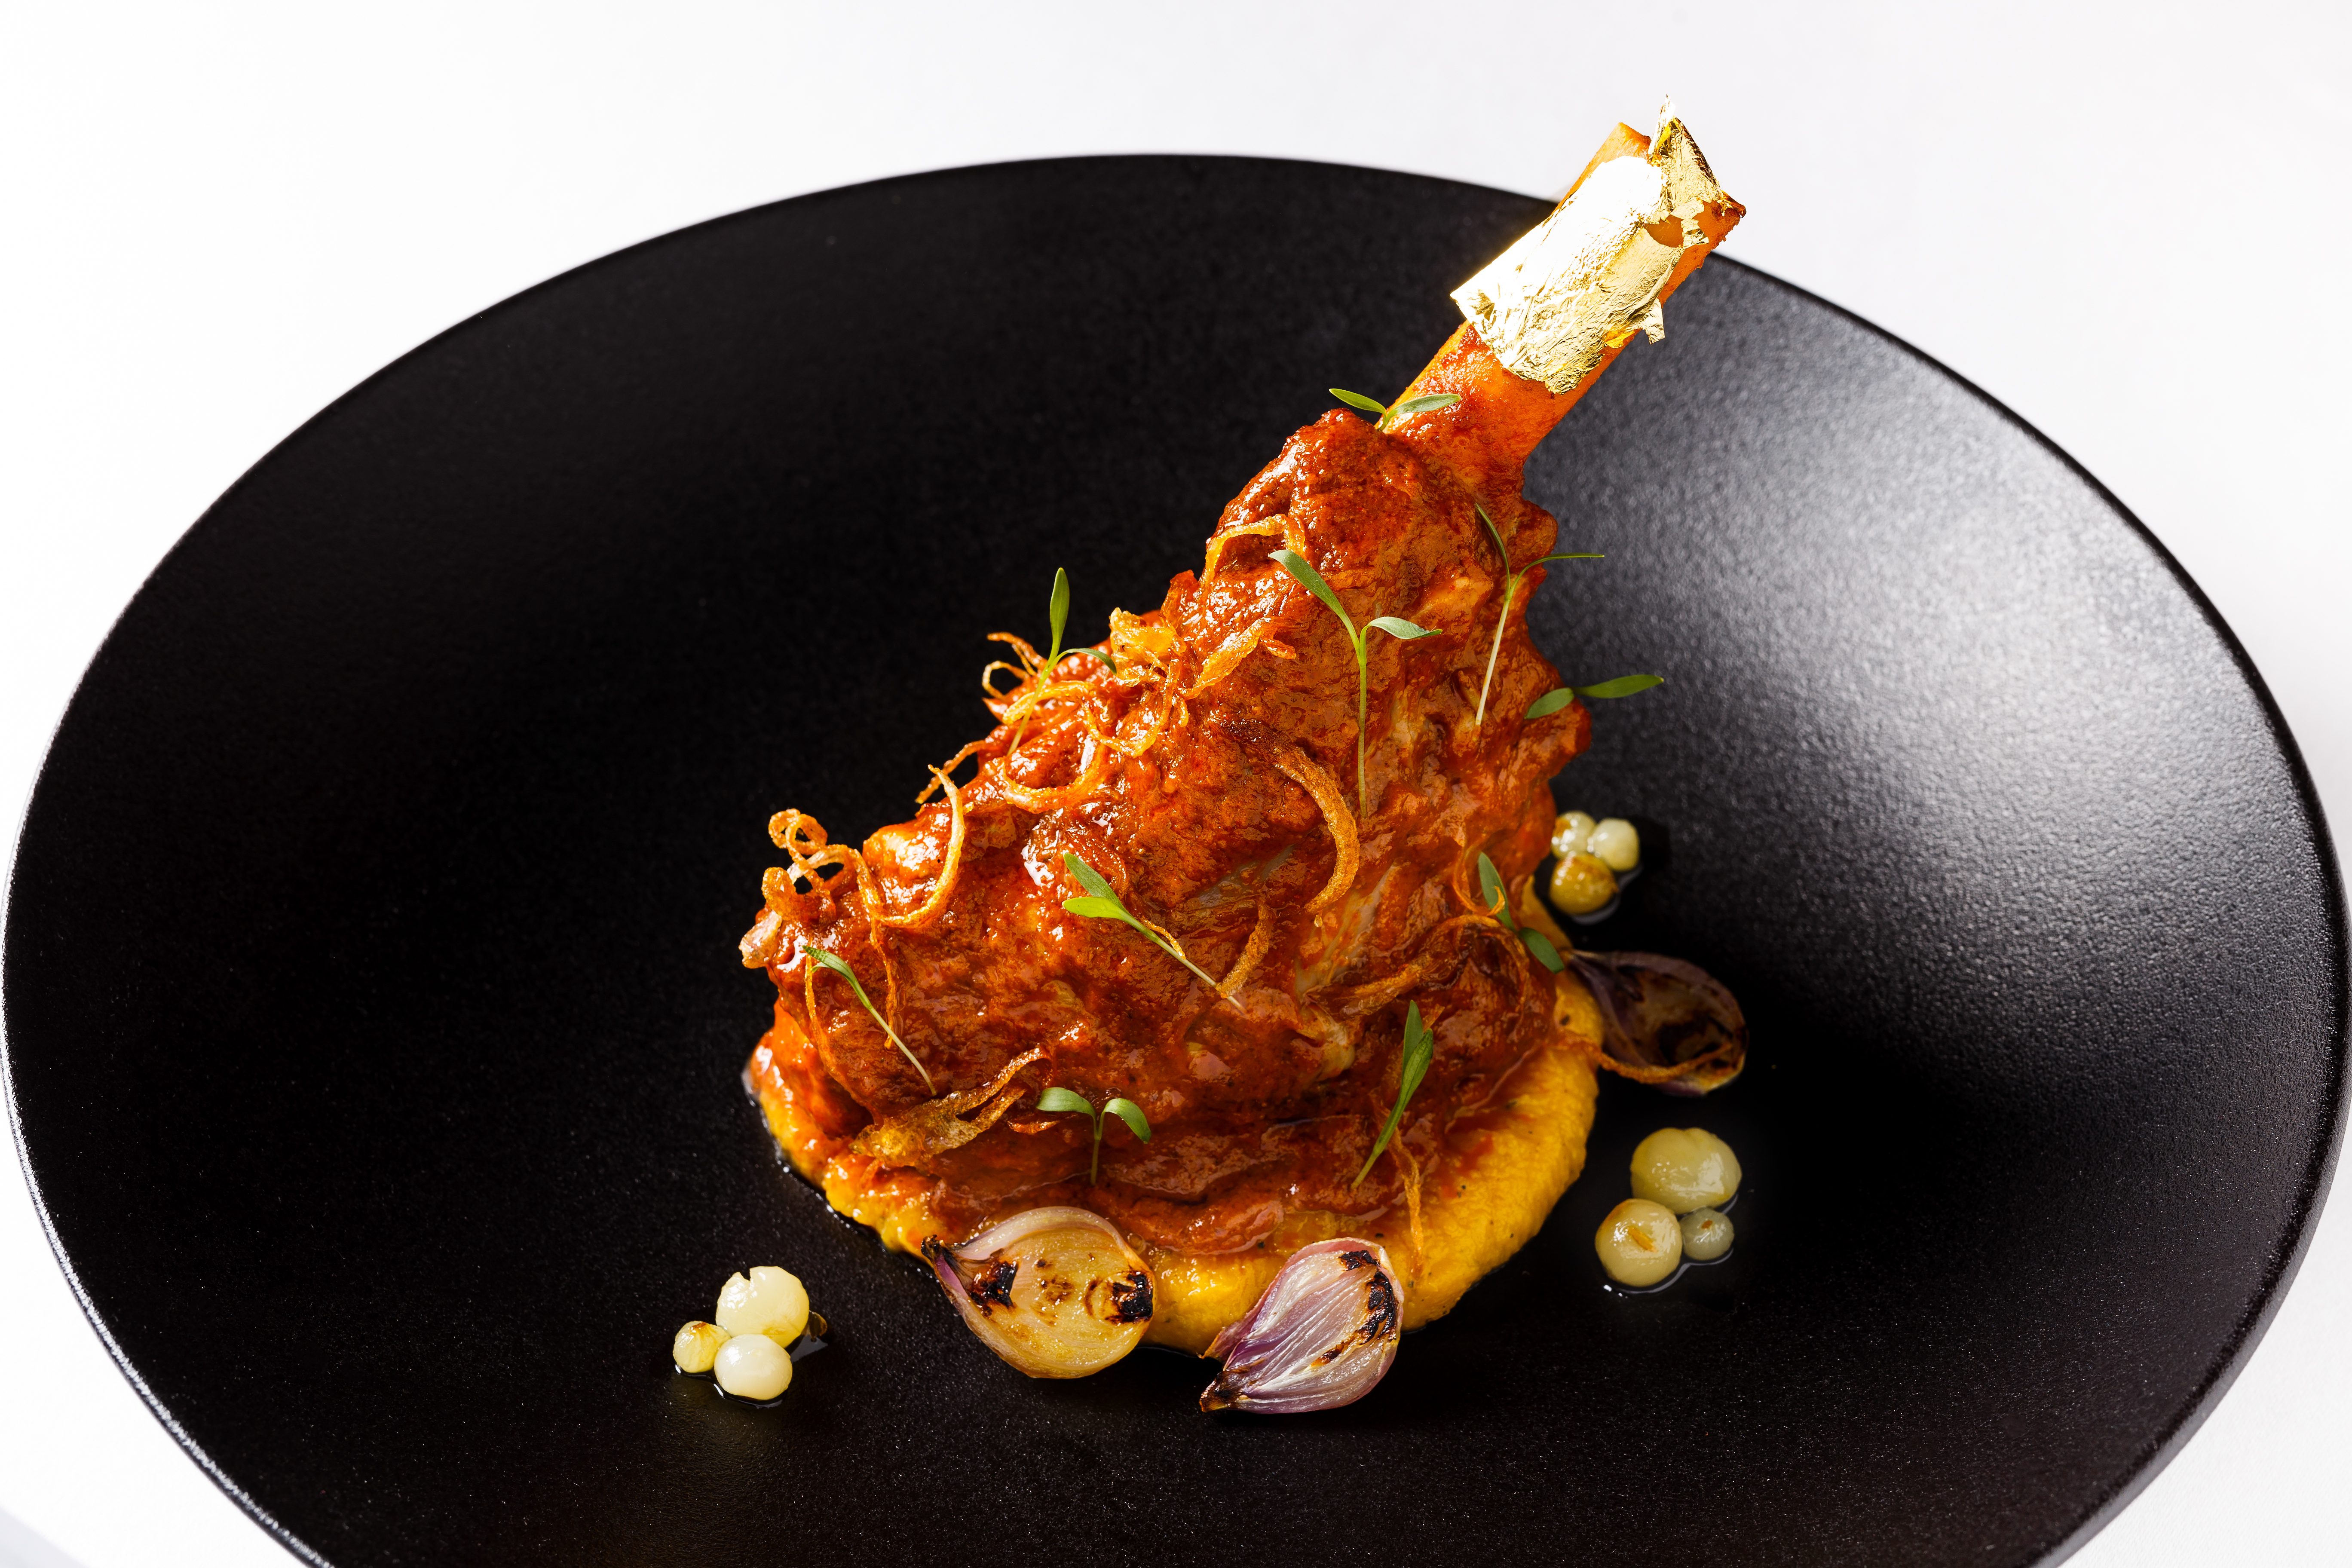 A lamb shanks recipe from a Michelin-star chef